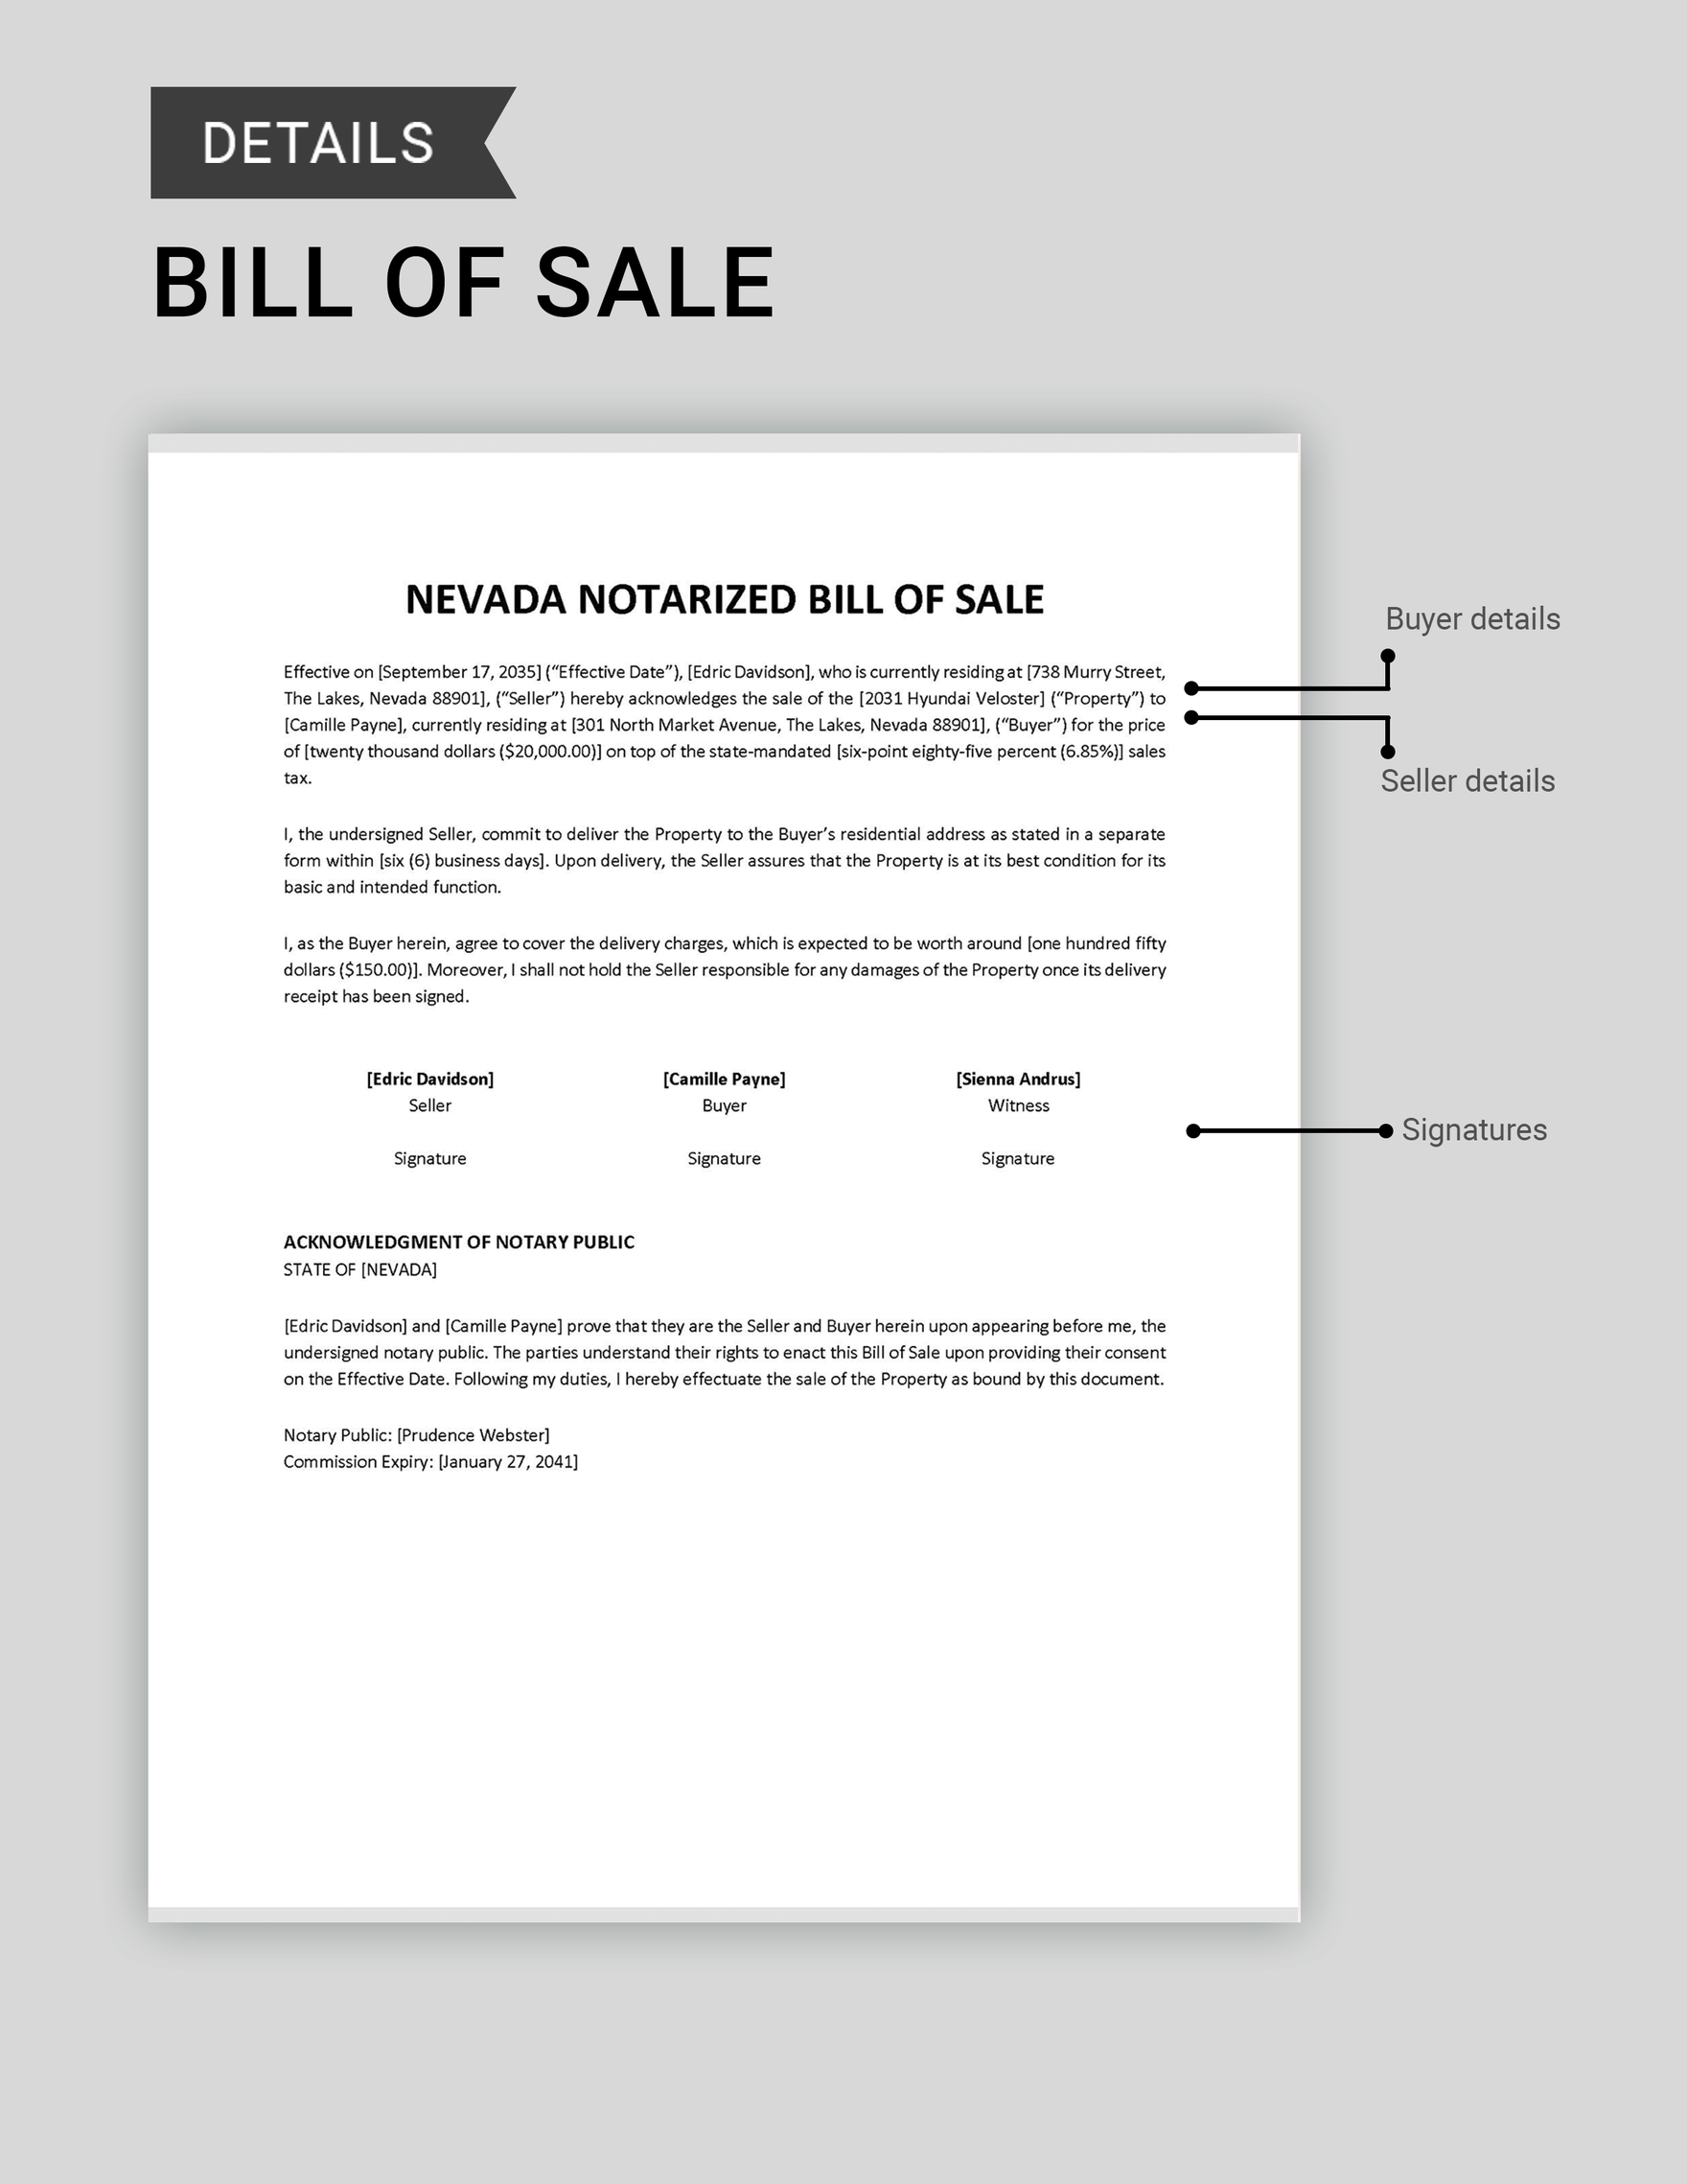 Nevada Notarized Bill of Sale Template